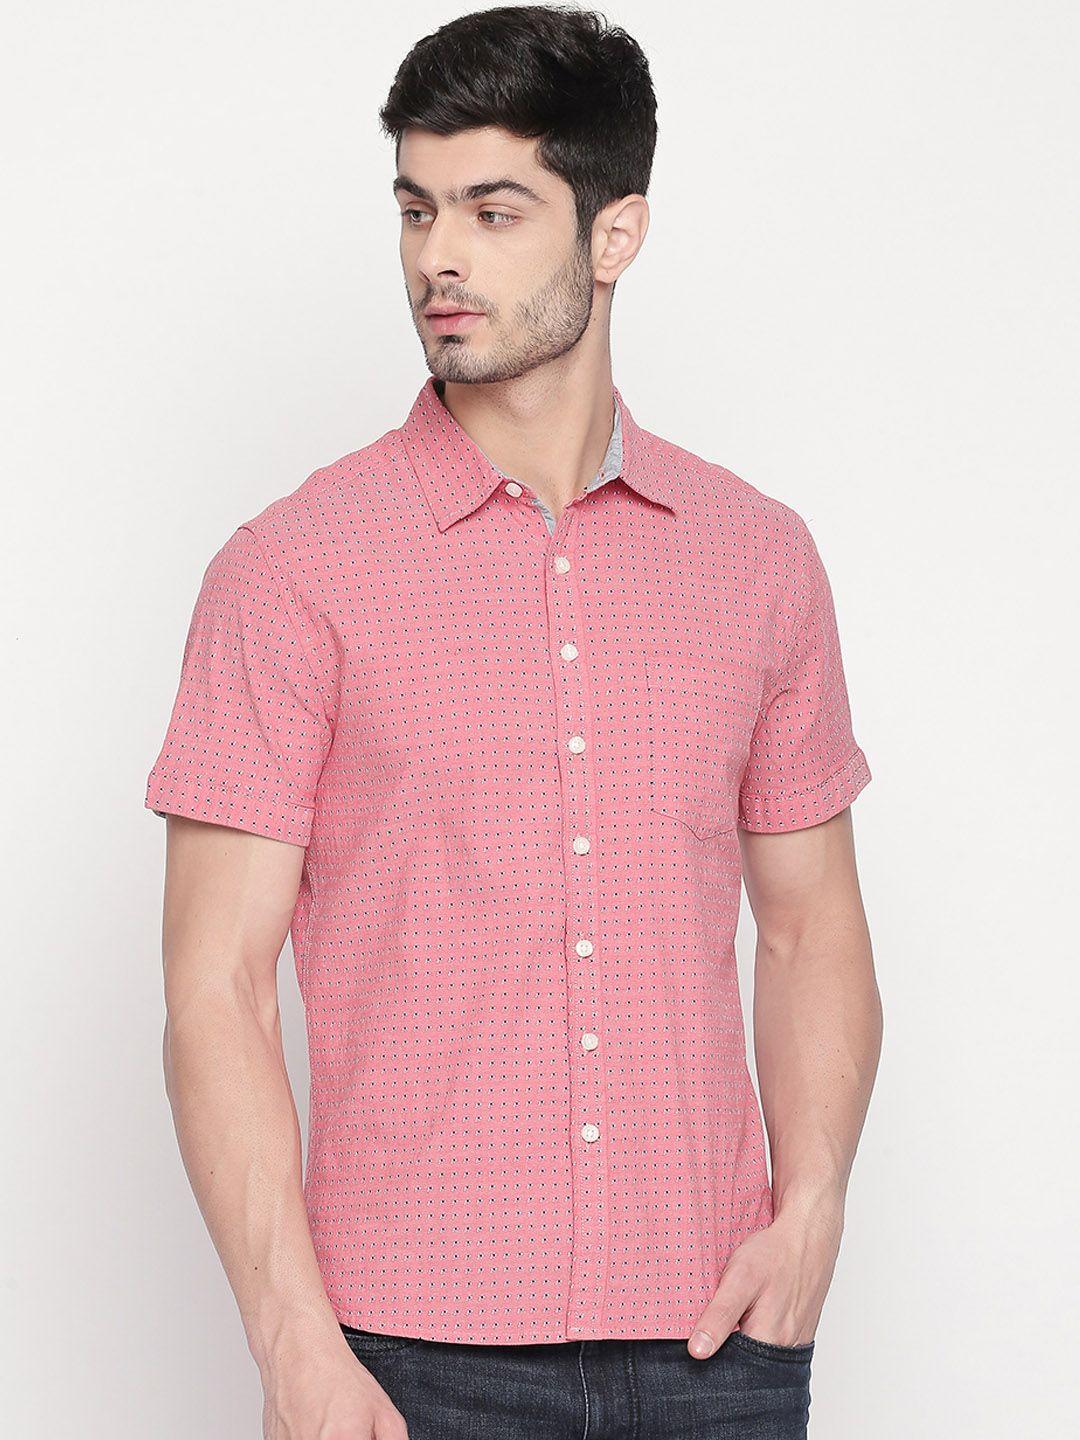 kenneth cole men red & white regular fit printed casual shirt